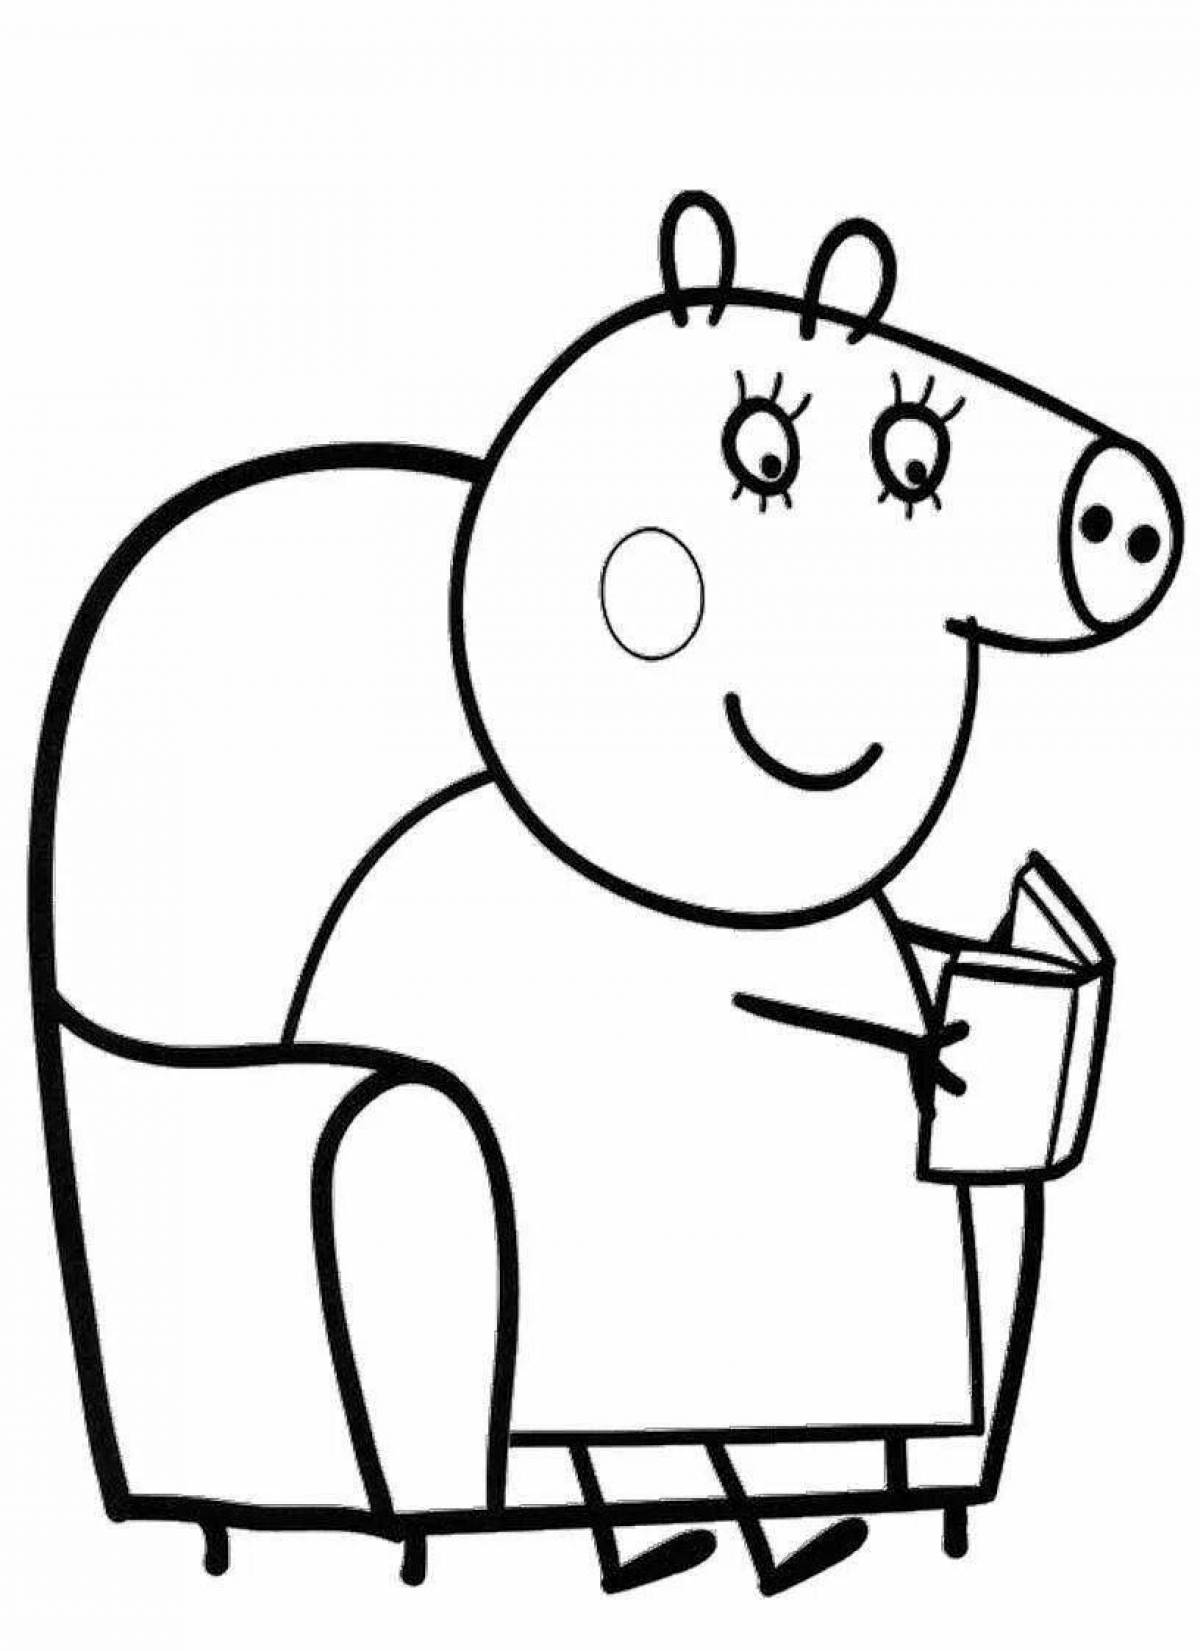 Colorful pig coloring page